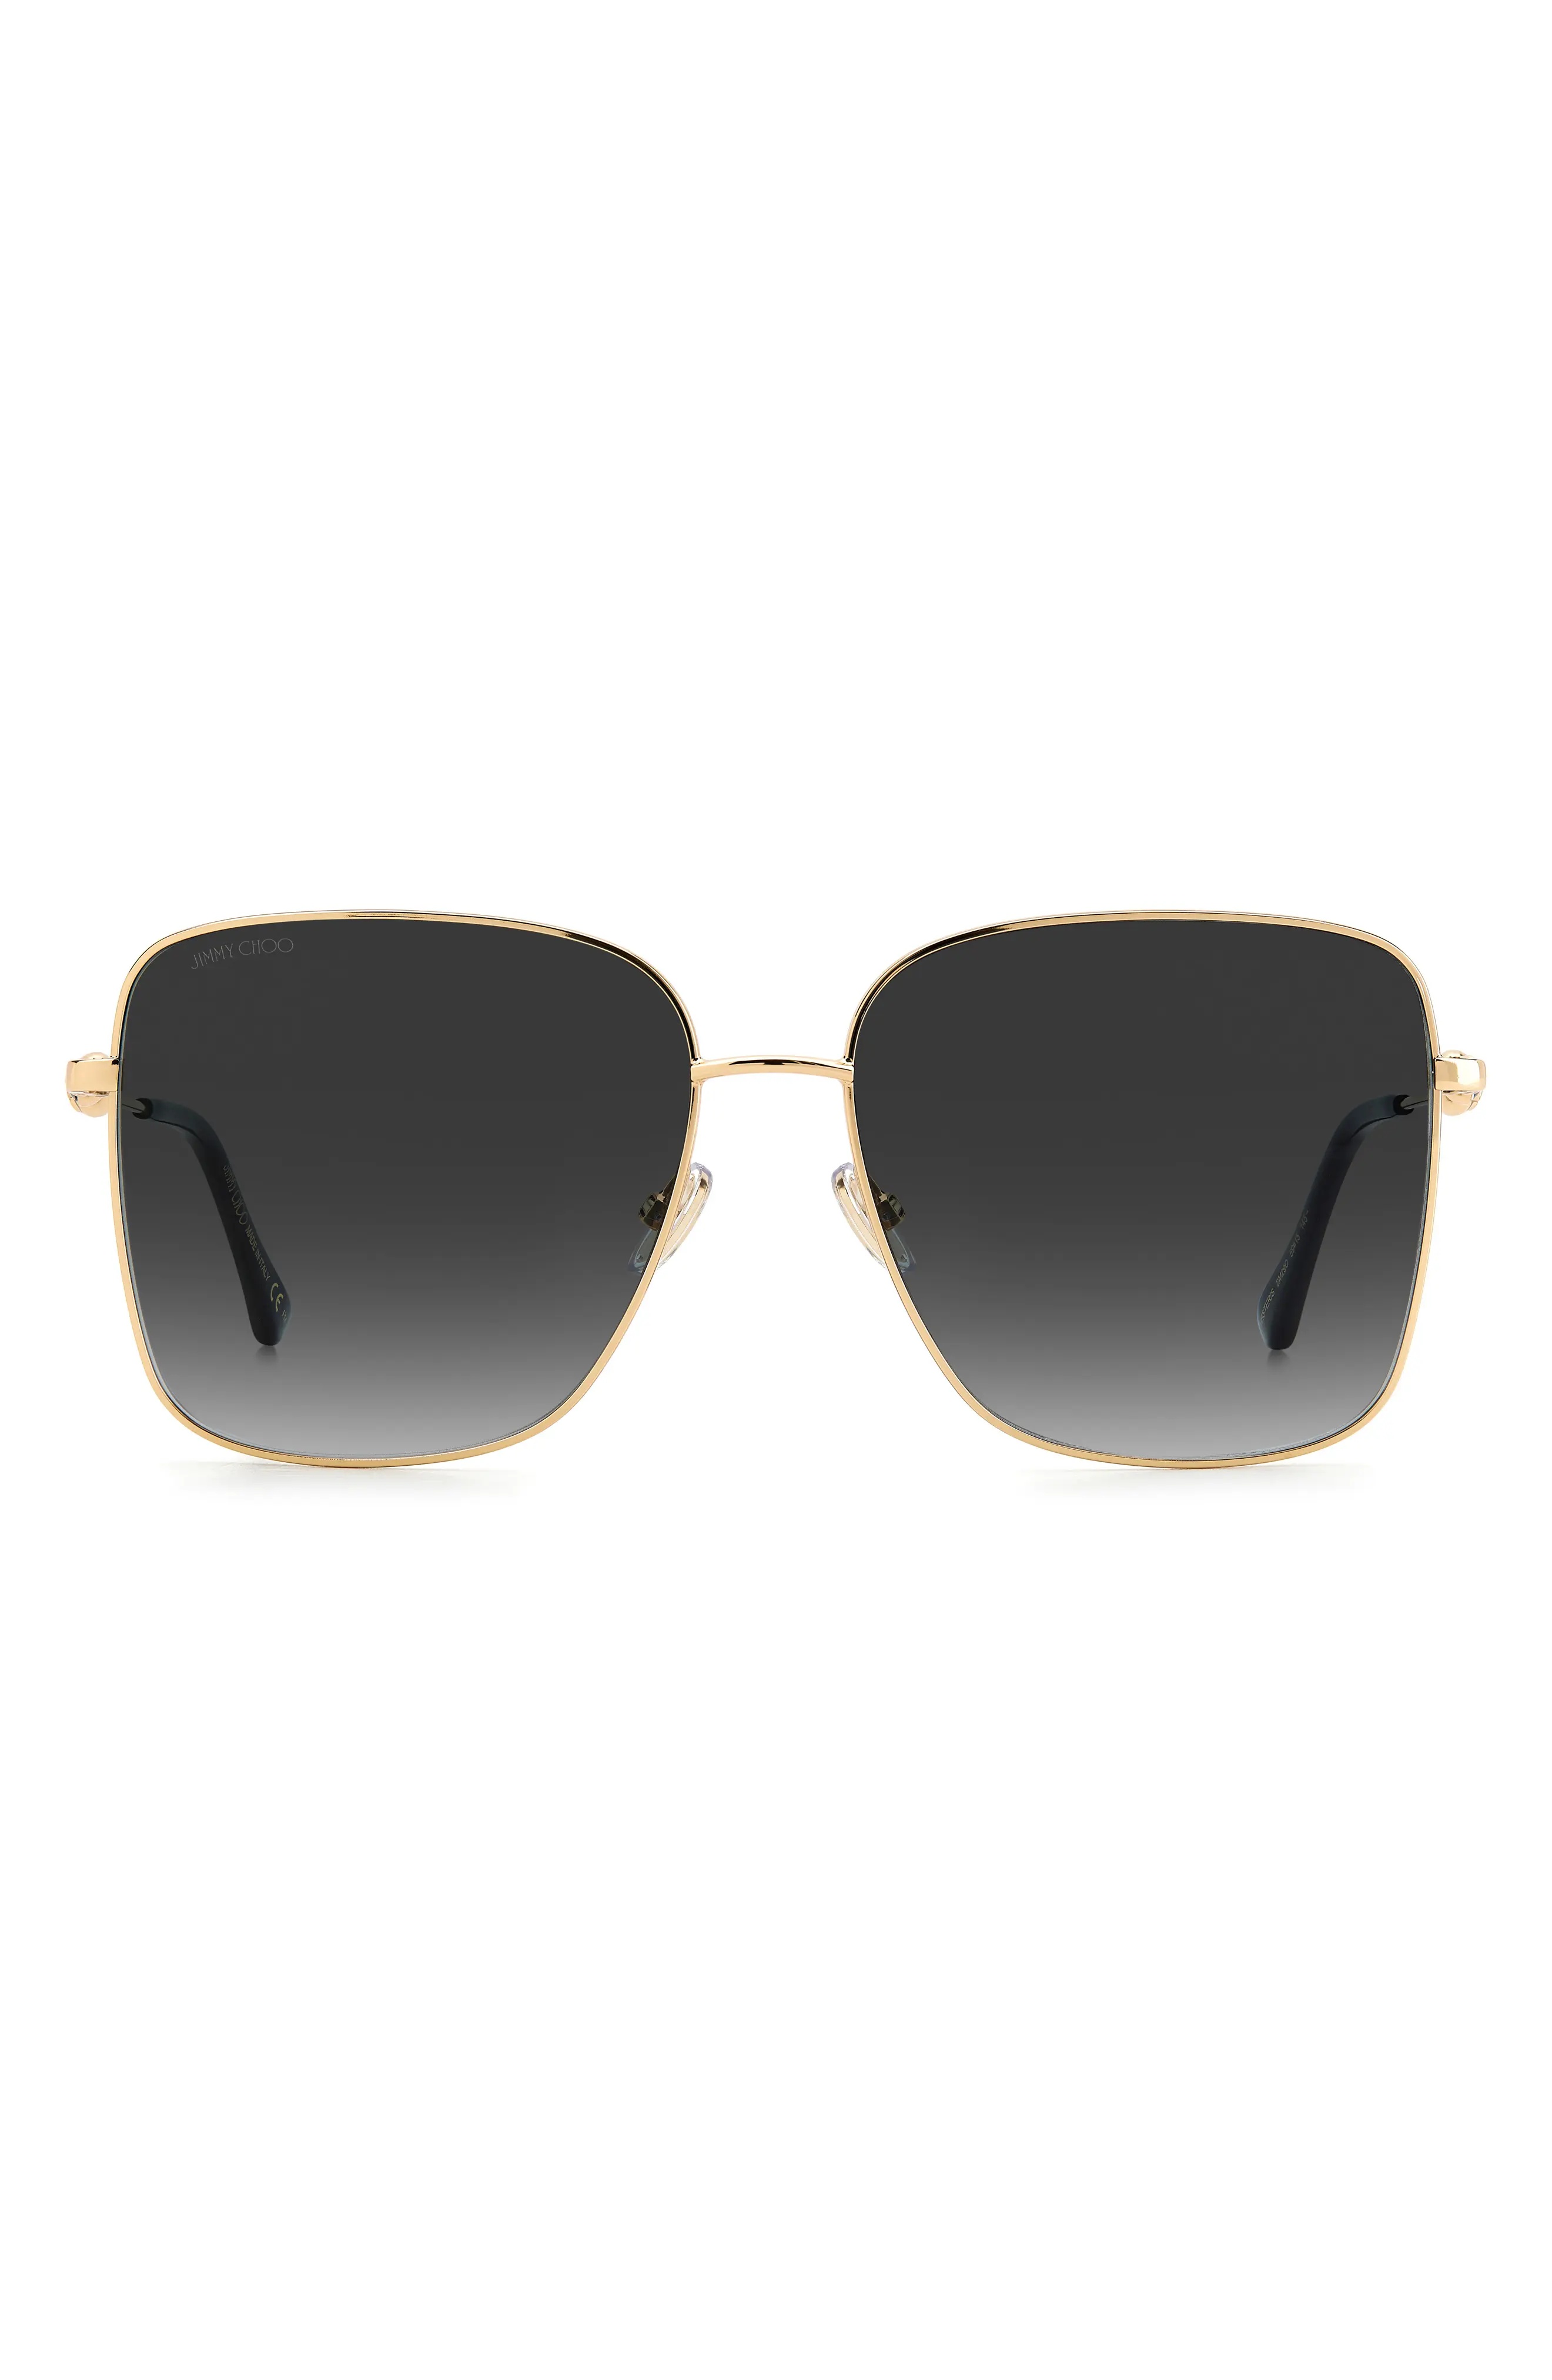 Hesters 59mm Gradient Square Sunglasses in Black Gold /Grey Shaded - 1